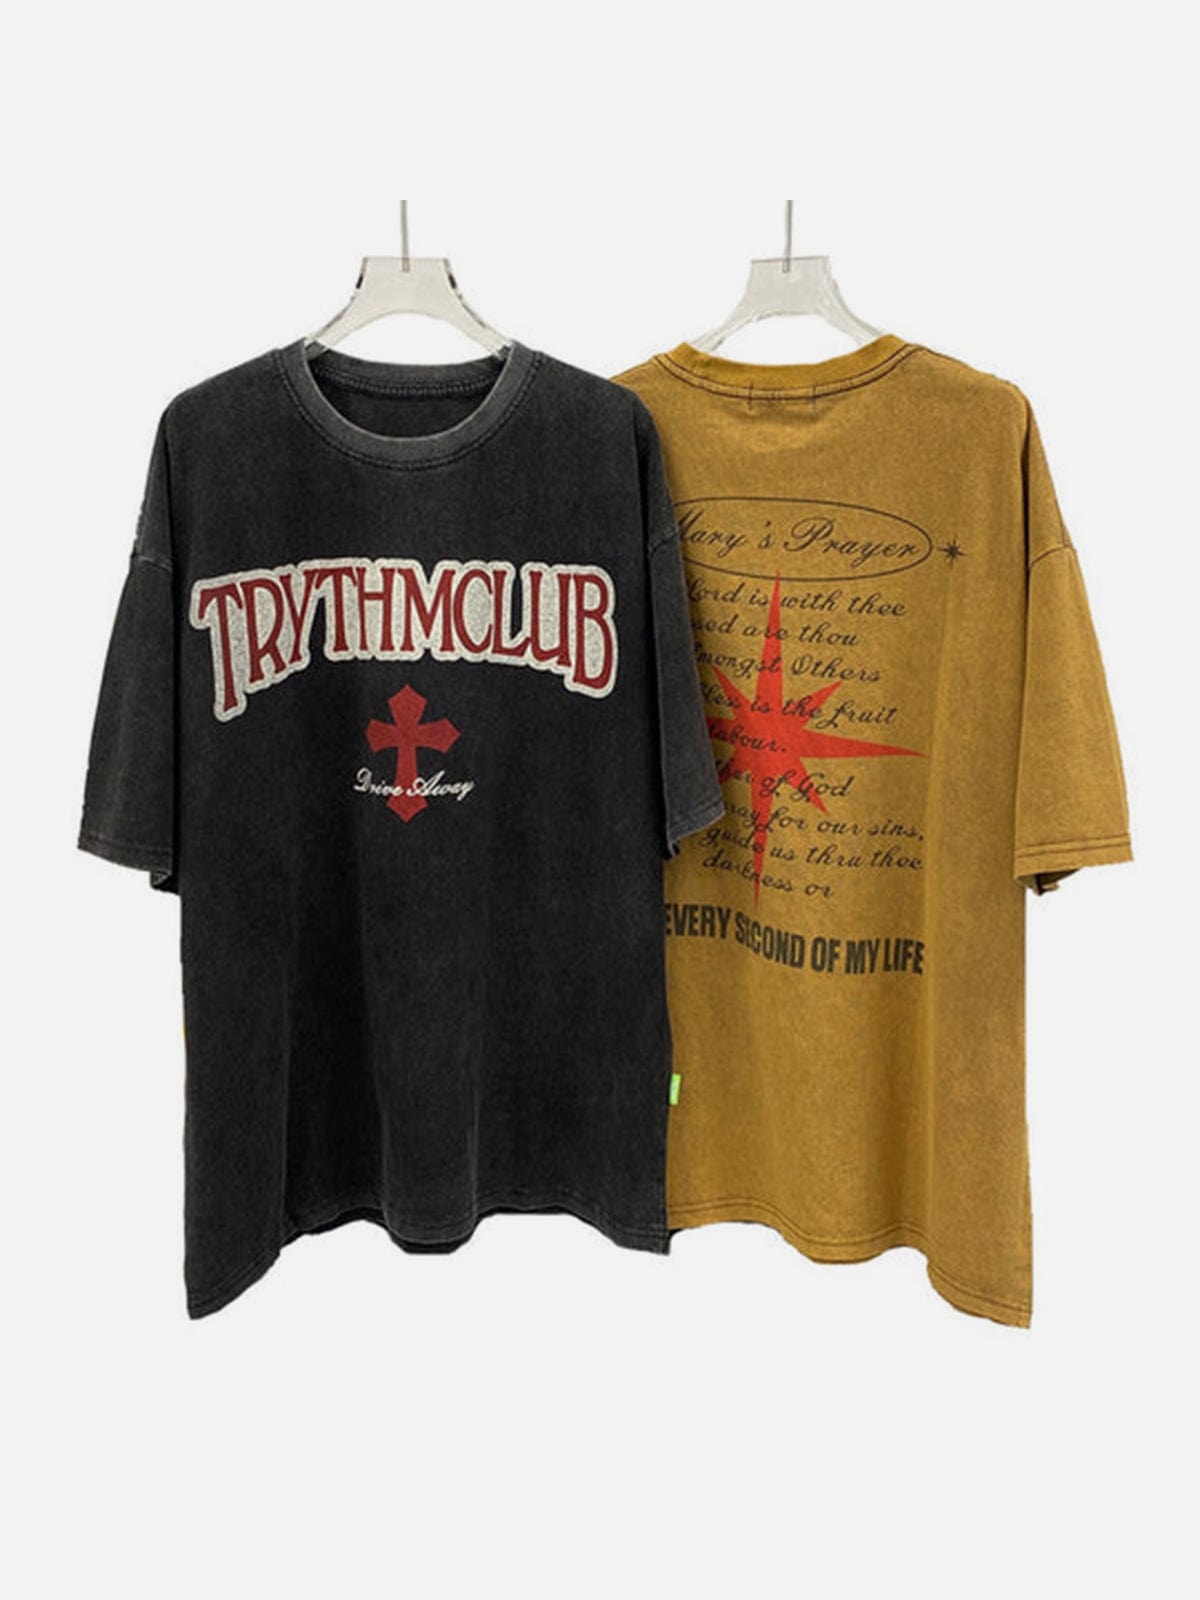 Letter Graphic Oversized Tee Streetwear Brand Techwear Combat Tactical YUGEN THEORY